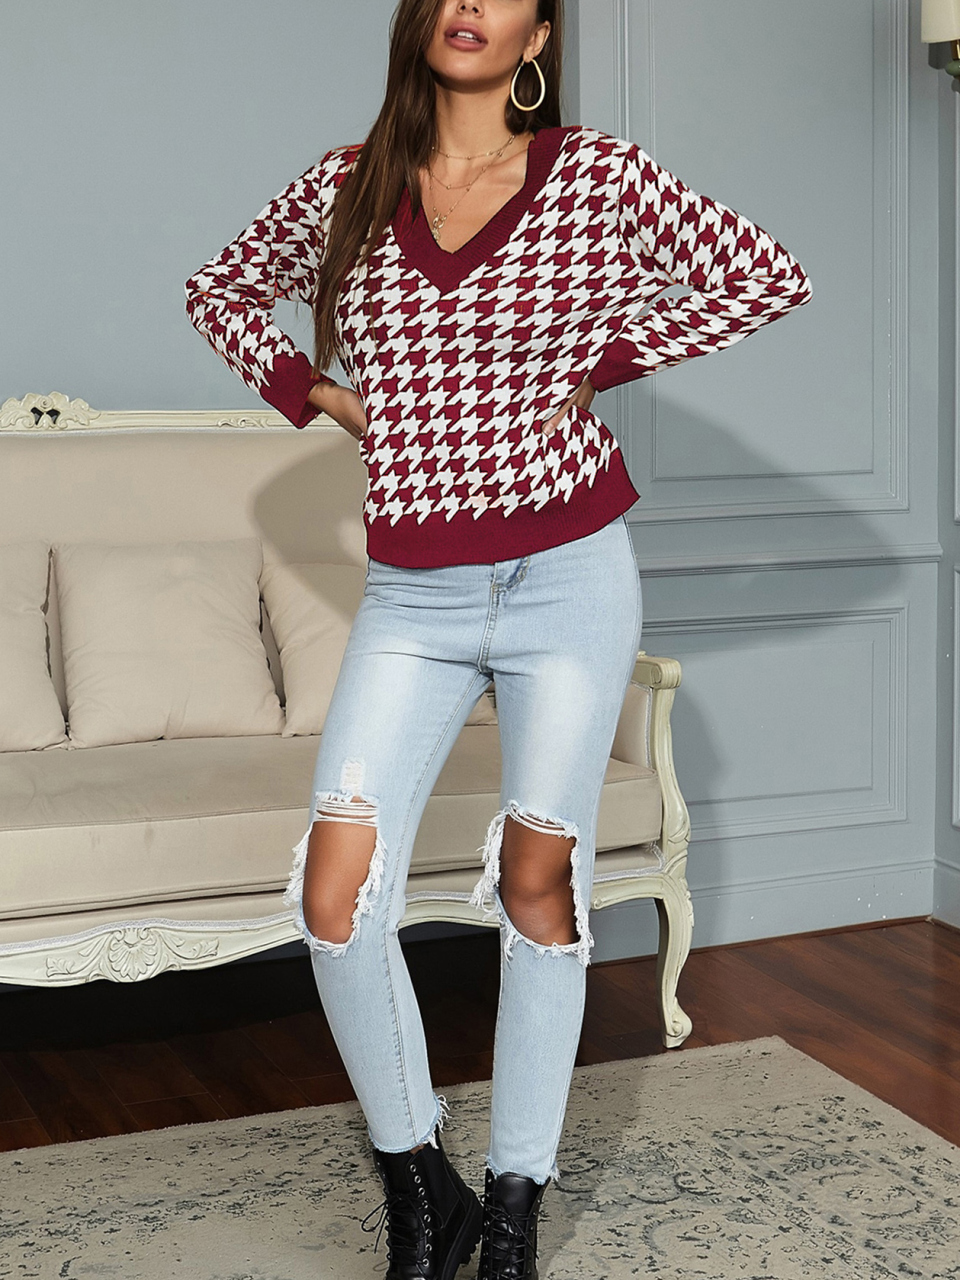 Women's Fashion Trend Houndstooth Sweater